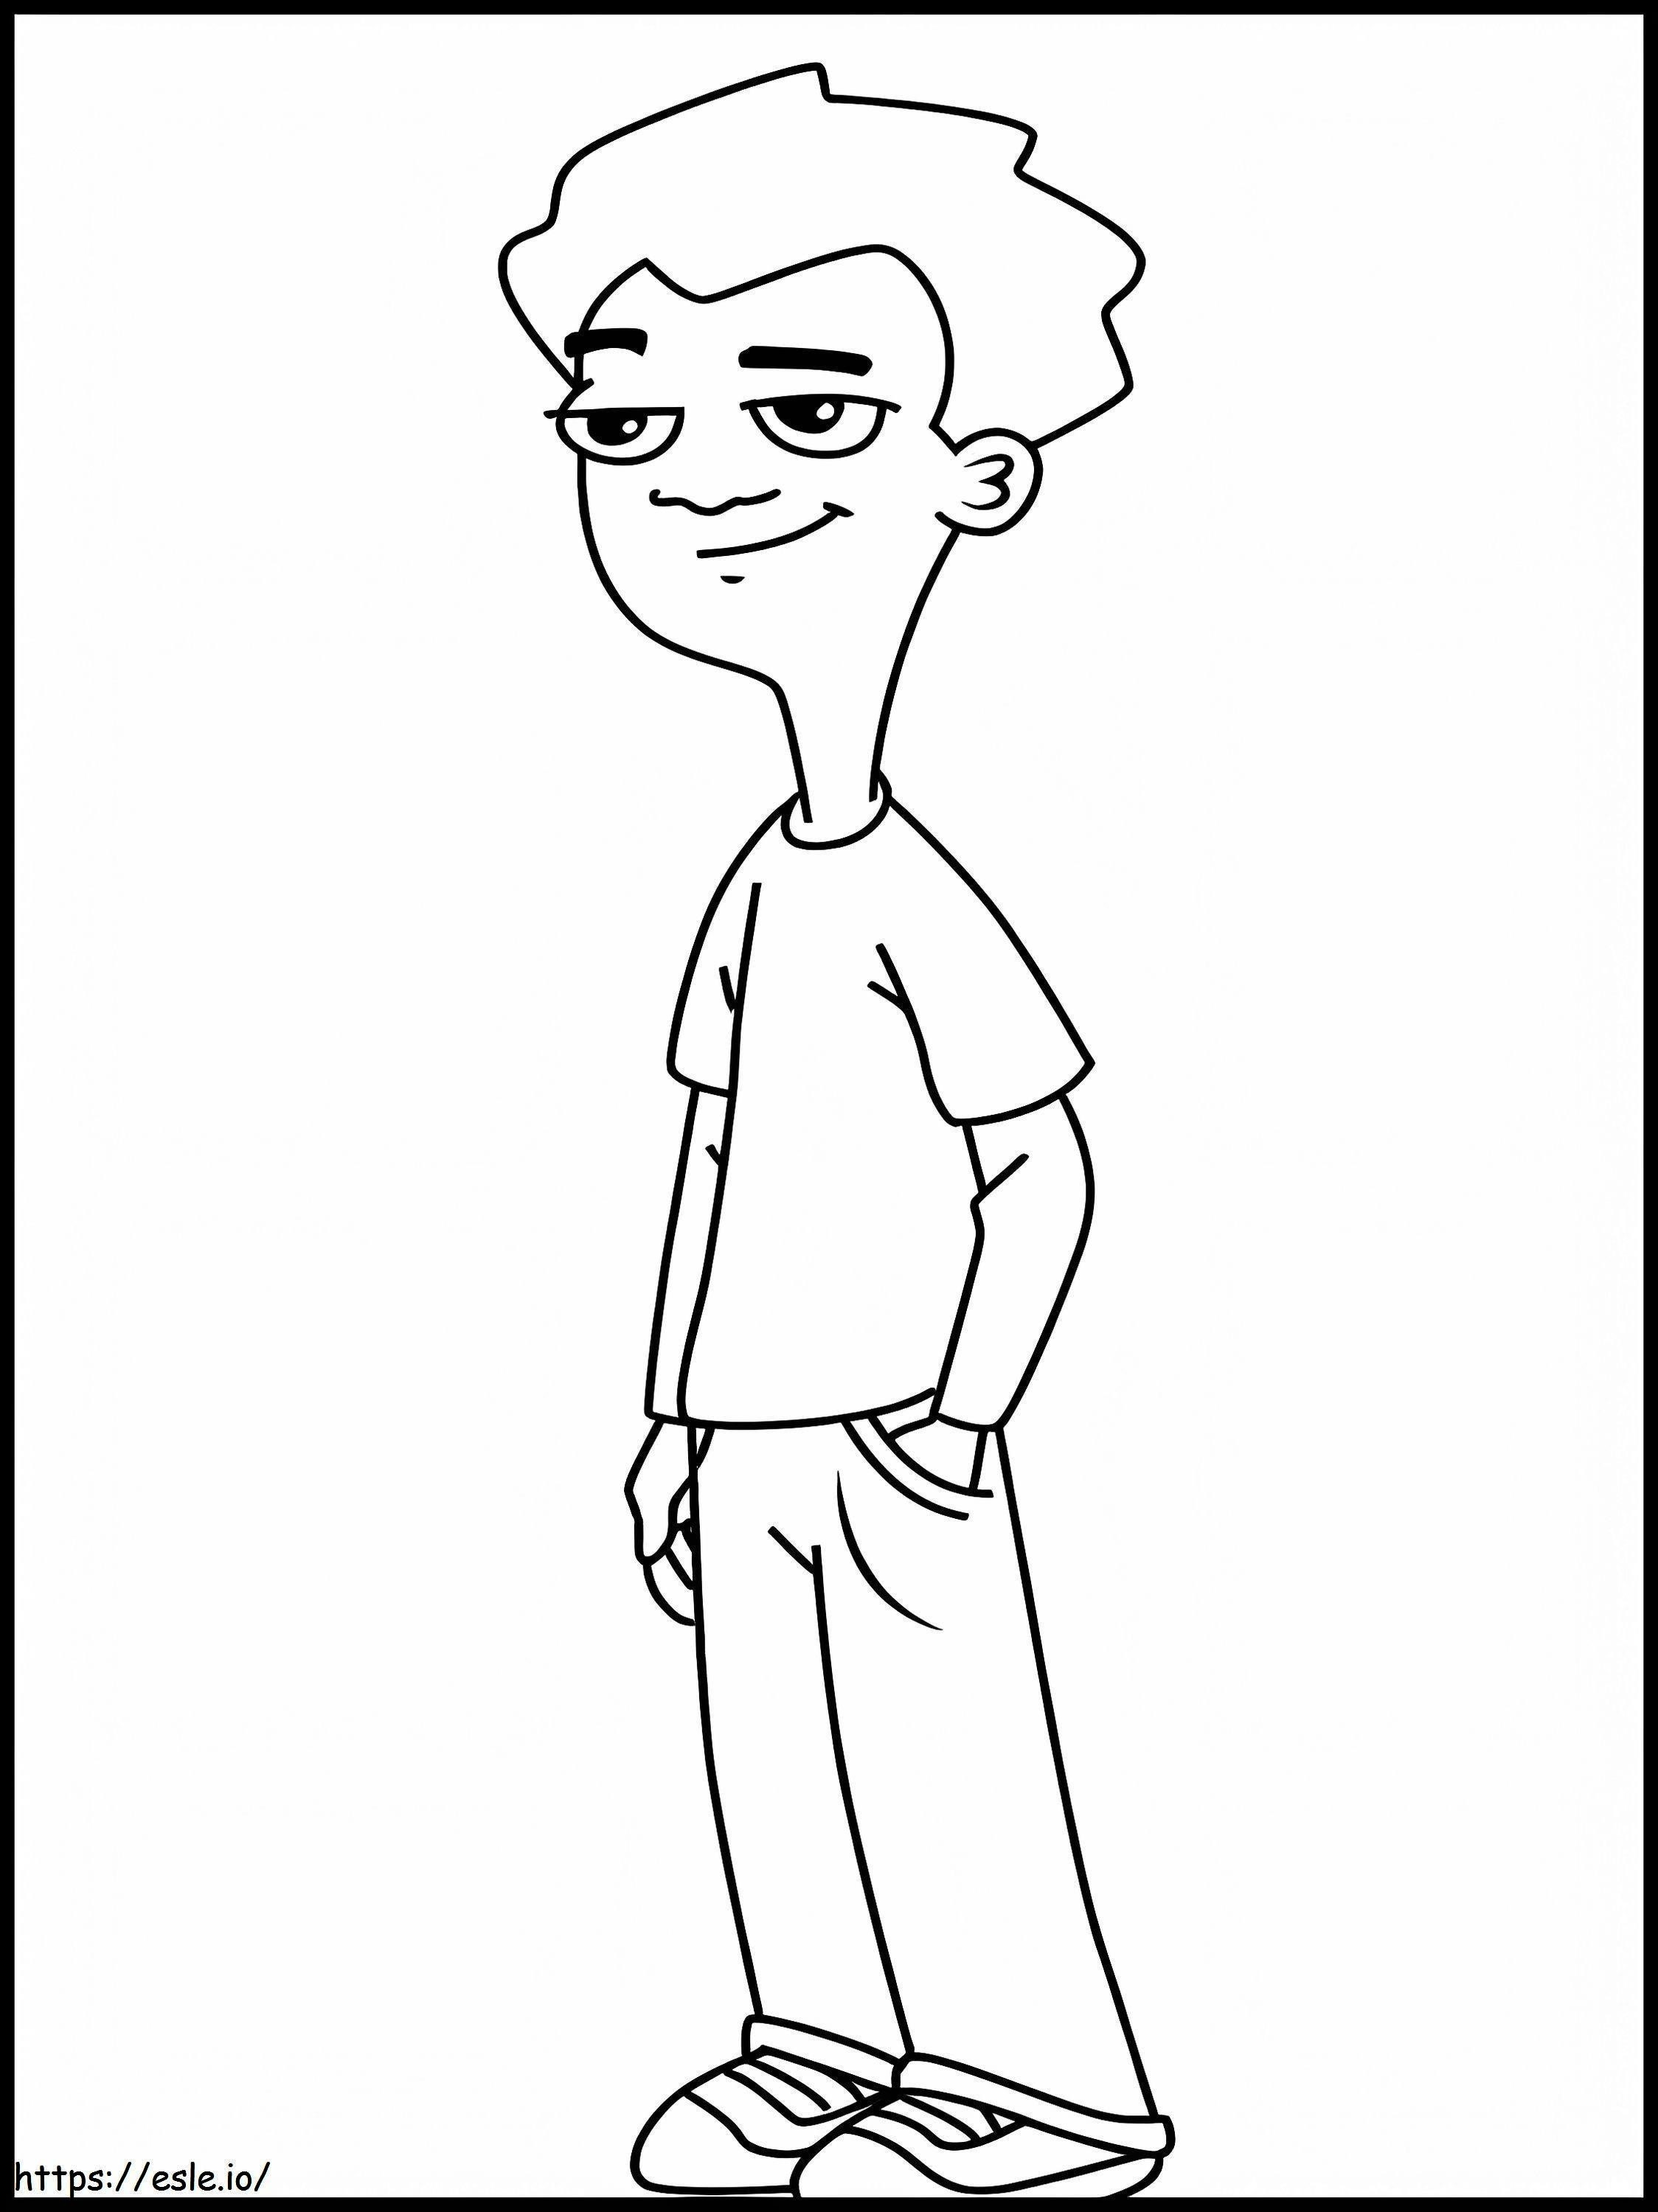 Zack Underwood coloring page